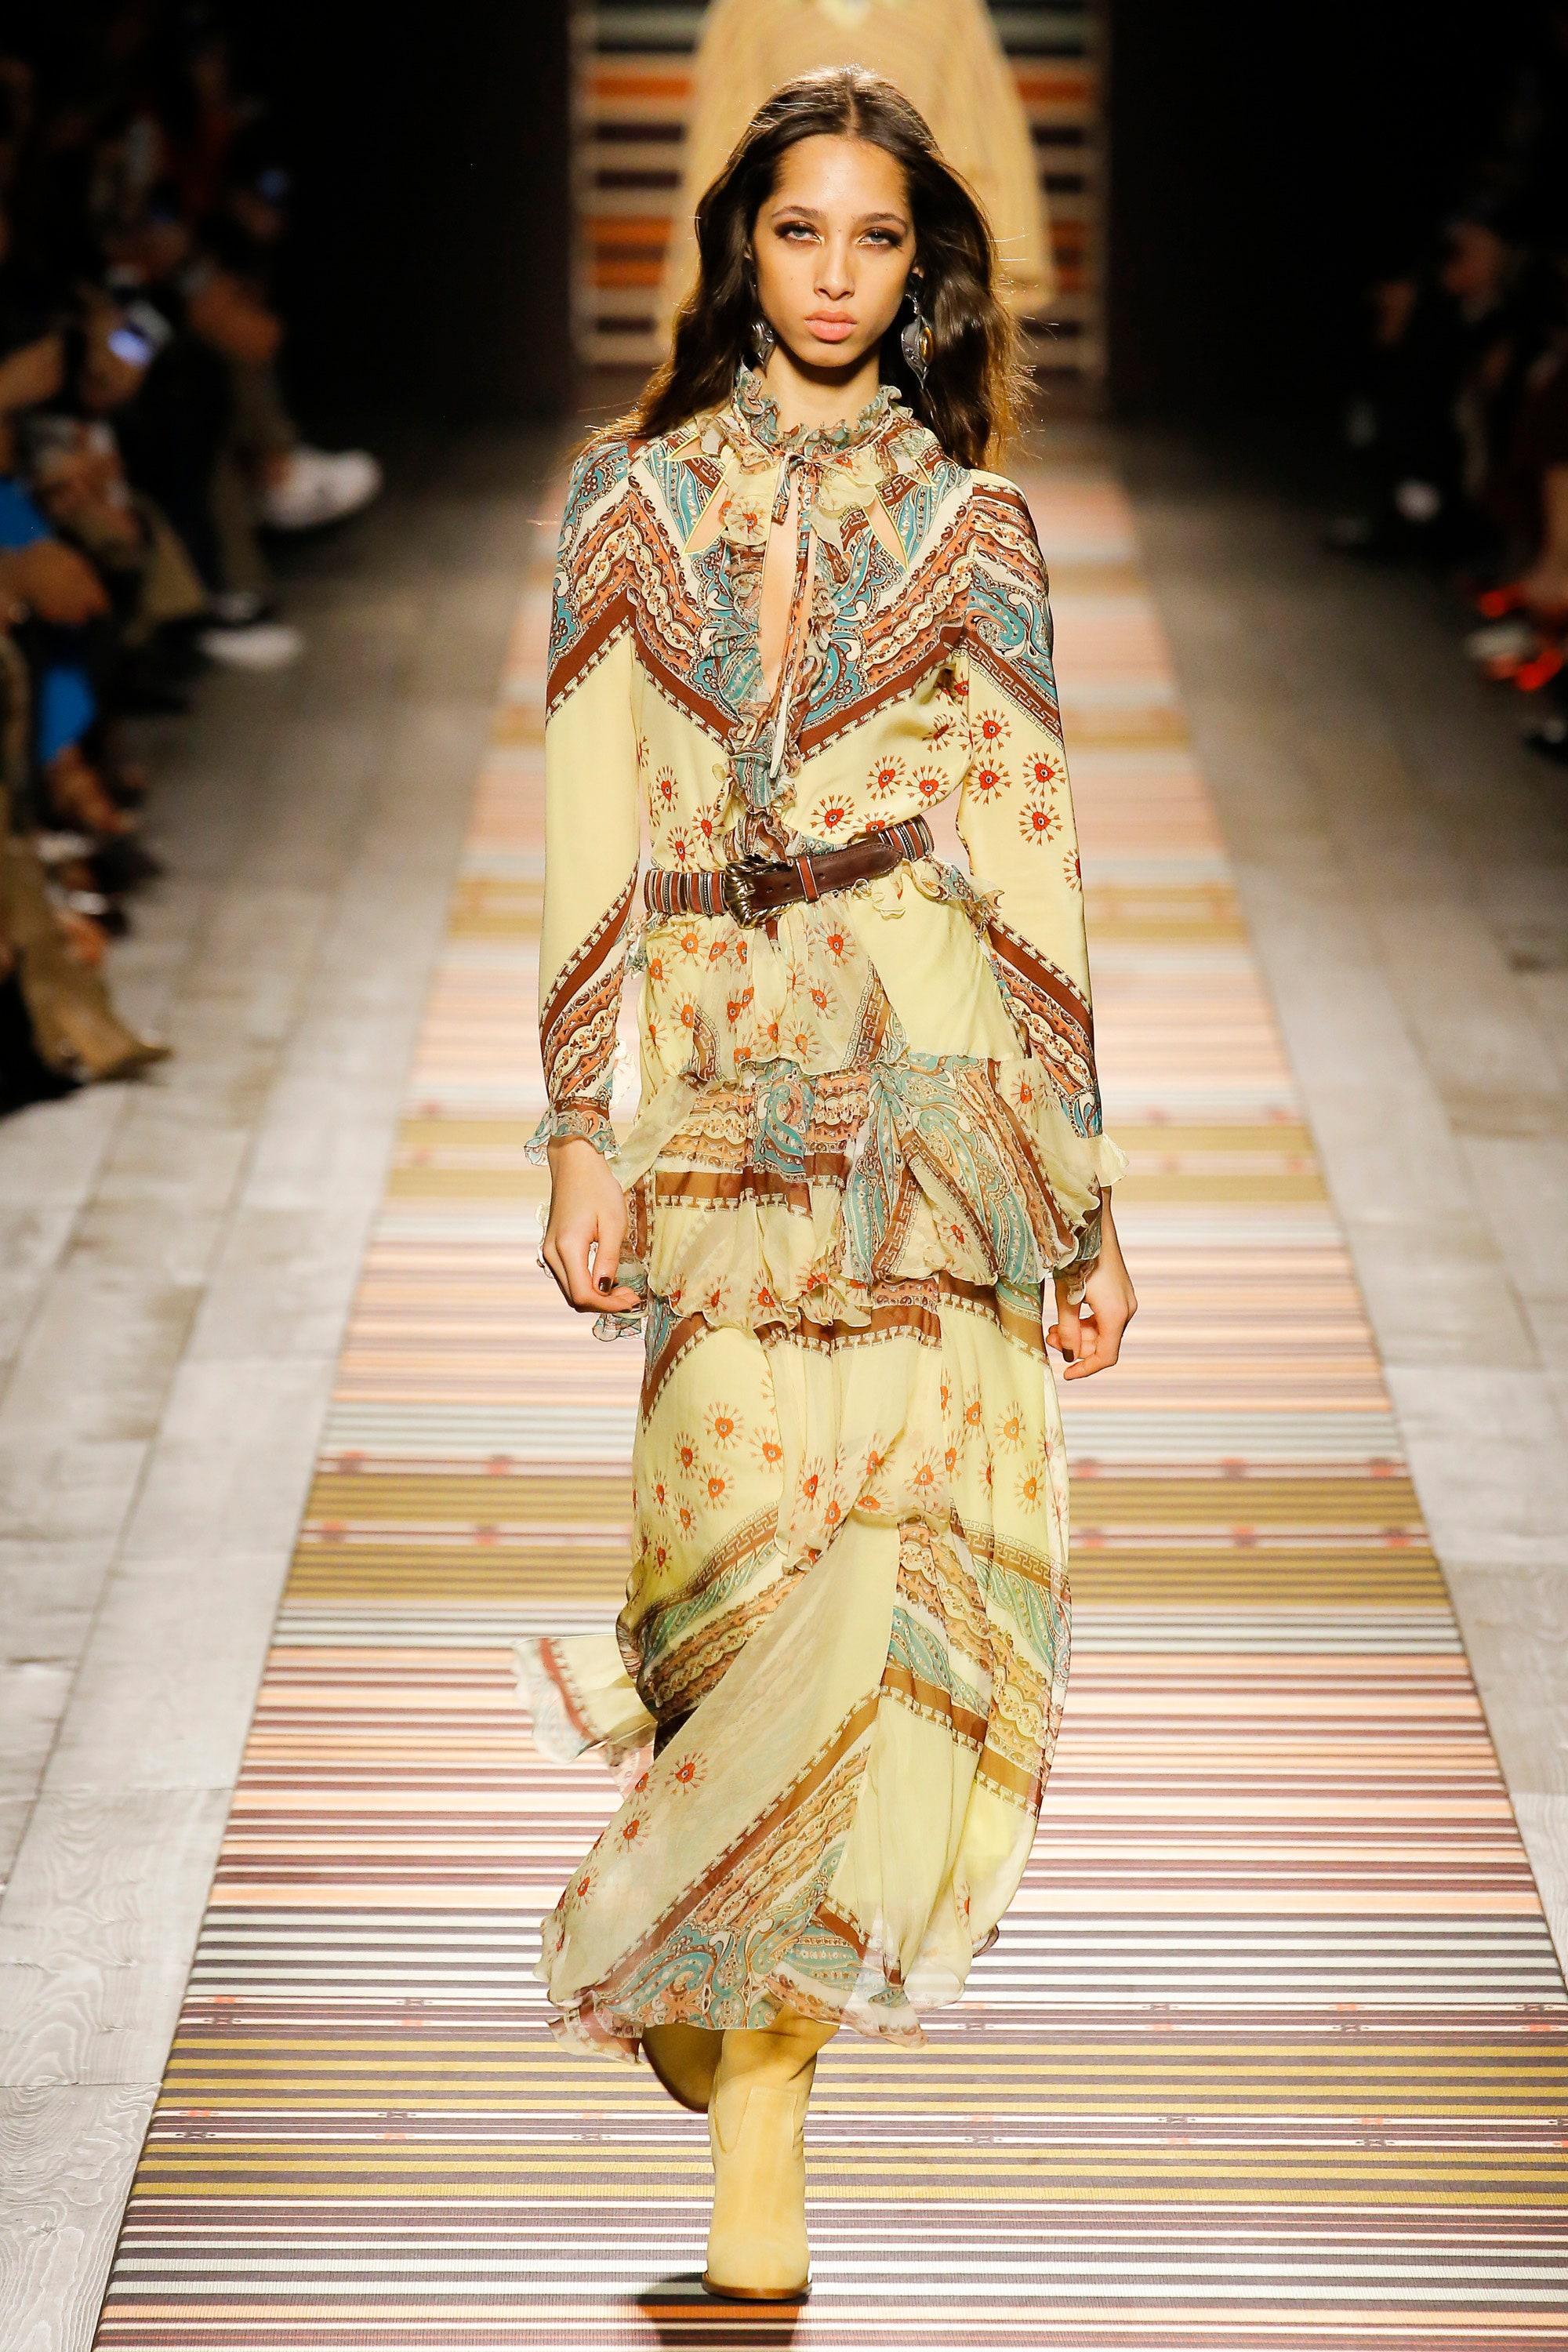 For Autumn 2018 Etro takes a journey to the land of the endless horizon. For this collection, Veronica Etro found inspiration in the long shadows and dusty colourscapes of wide western landscapes wrapped up in the graphic sensibilities of European